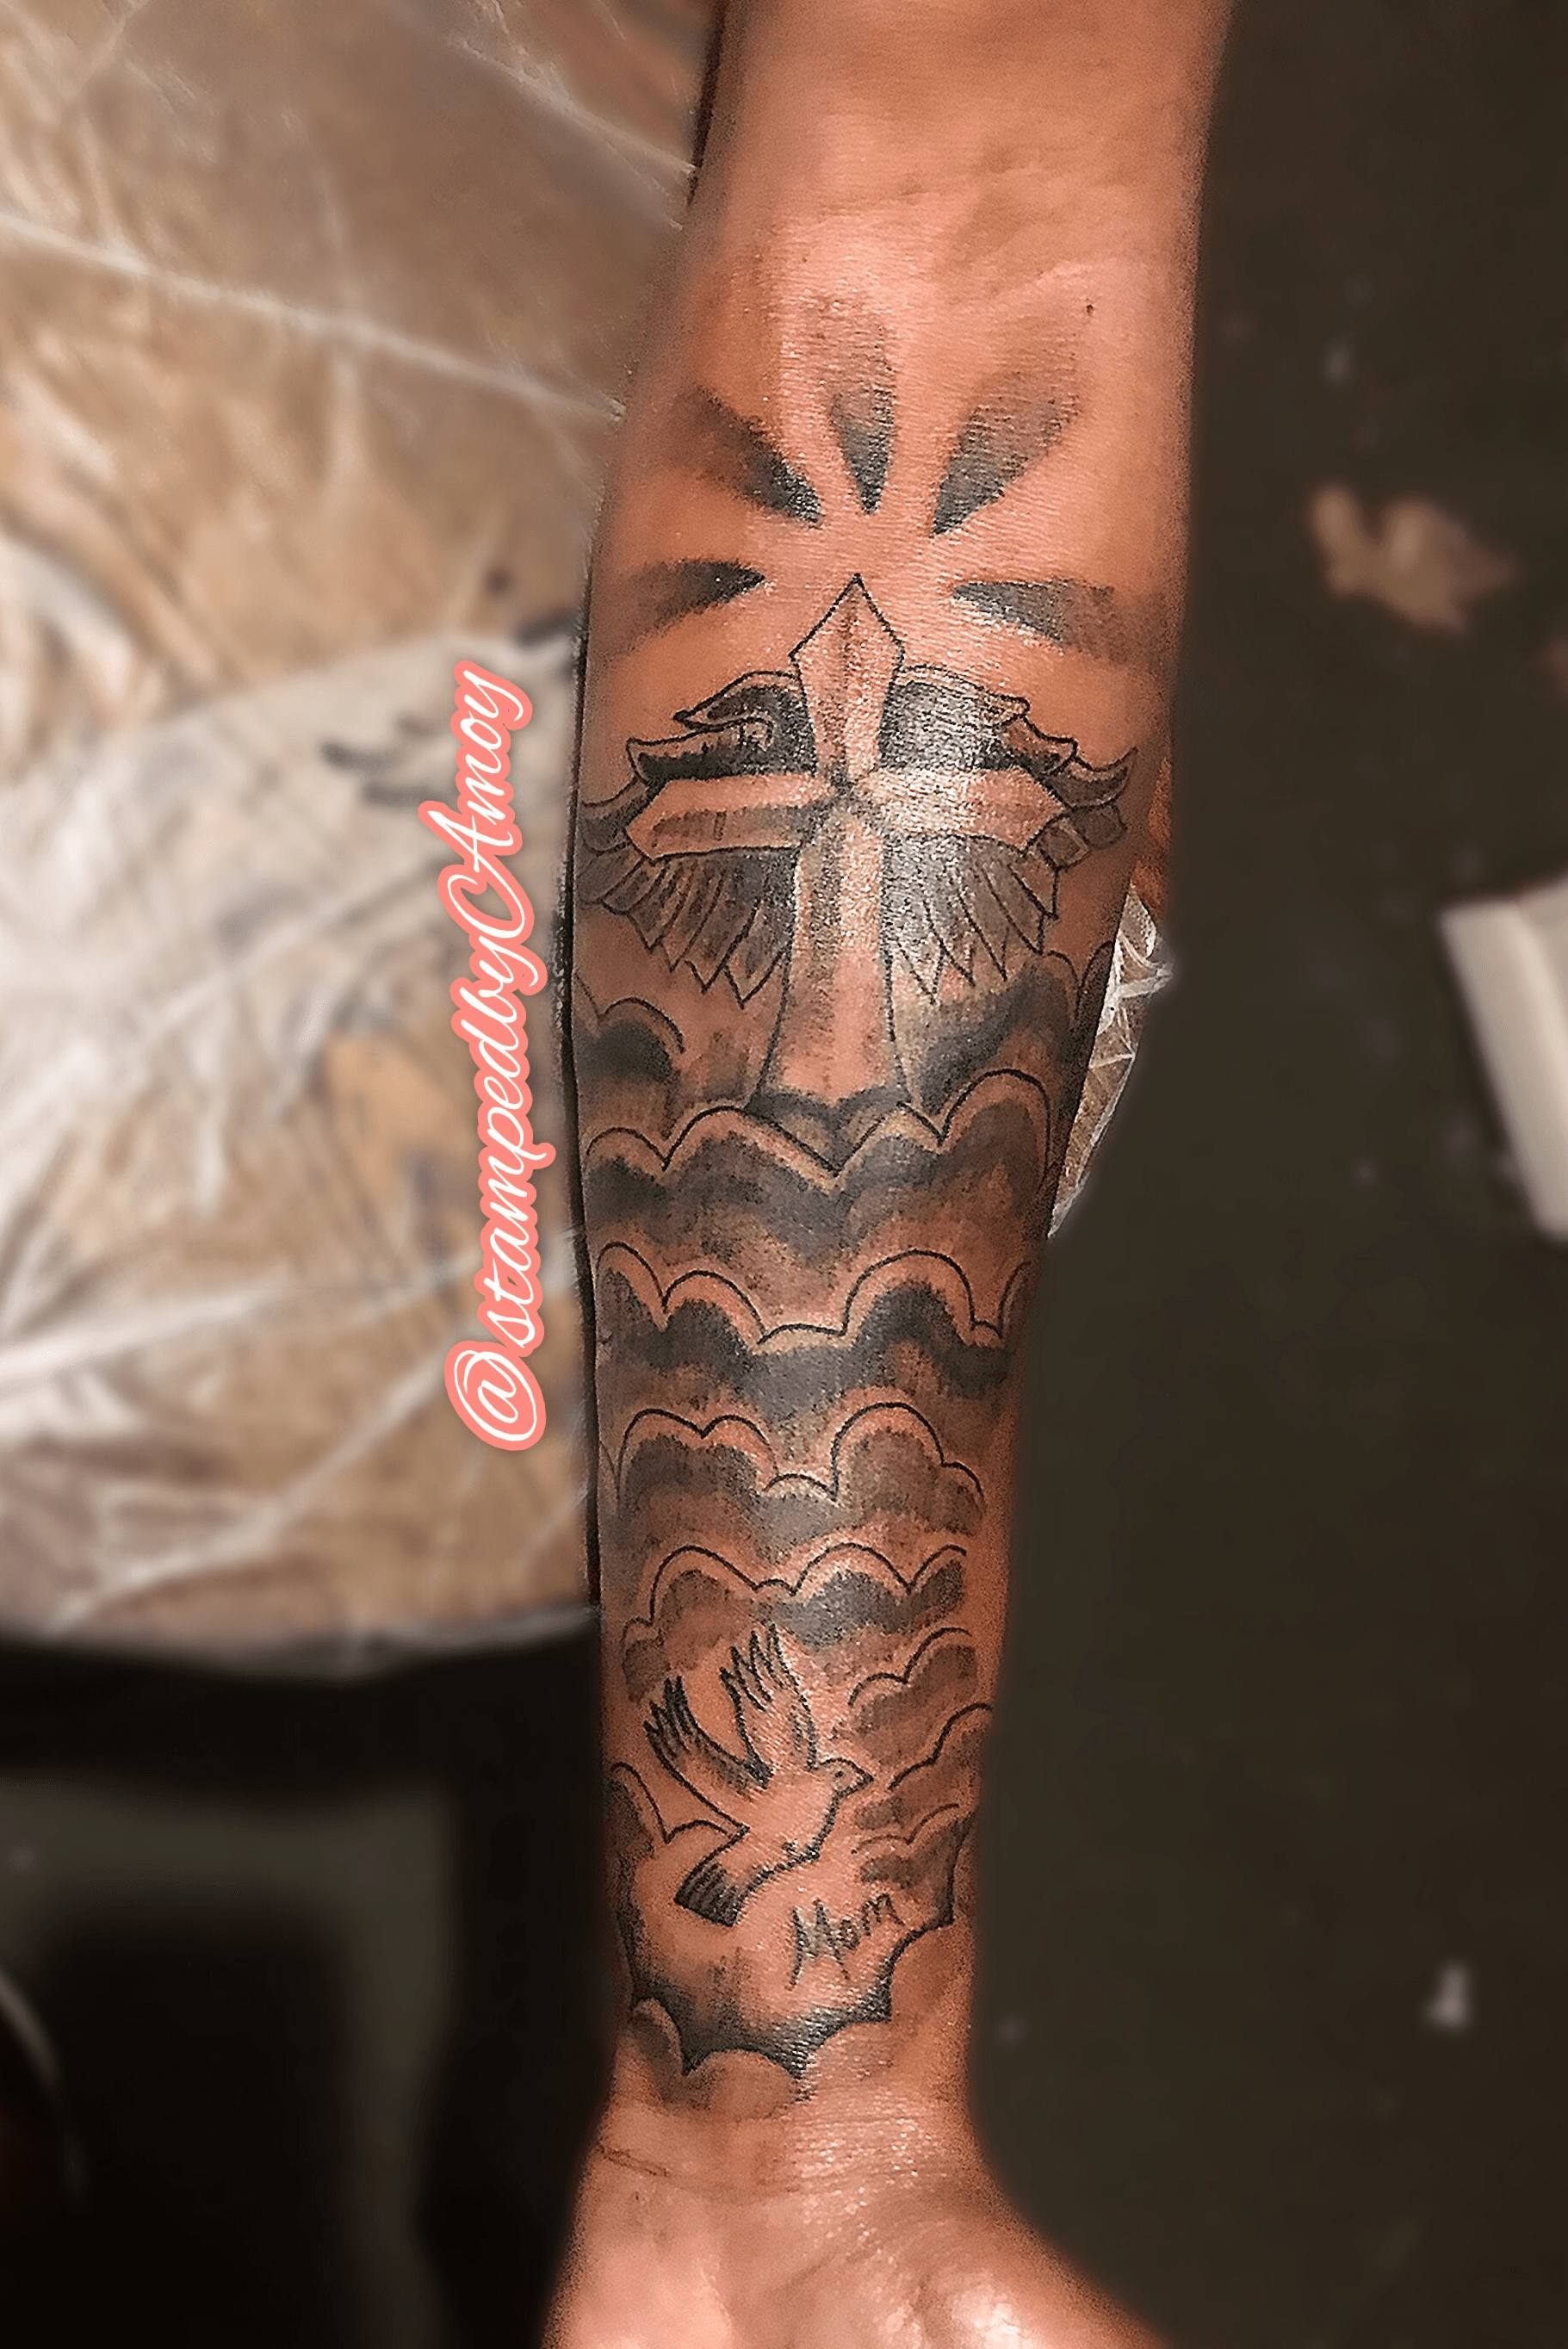 Tattoo uploaded by Amoy Amonte • Clouds, cross, dove. Mother dedication piece from son. Lower arm, half sleeve • Tattoodo